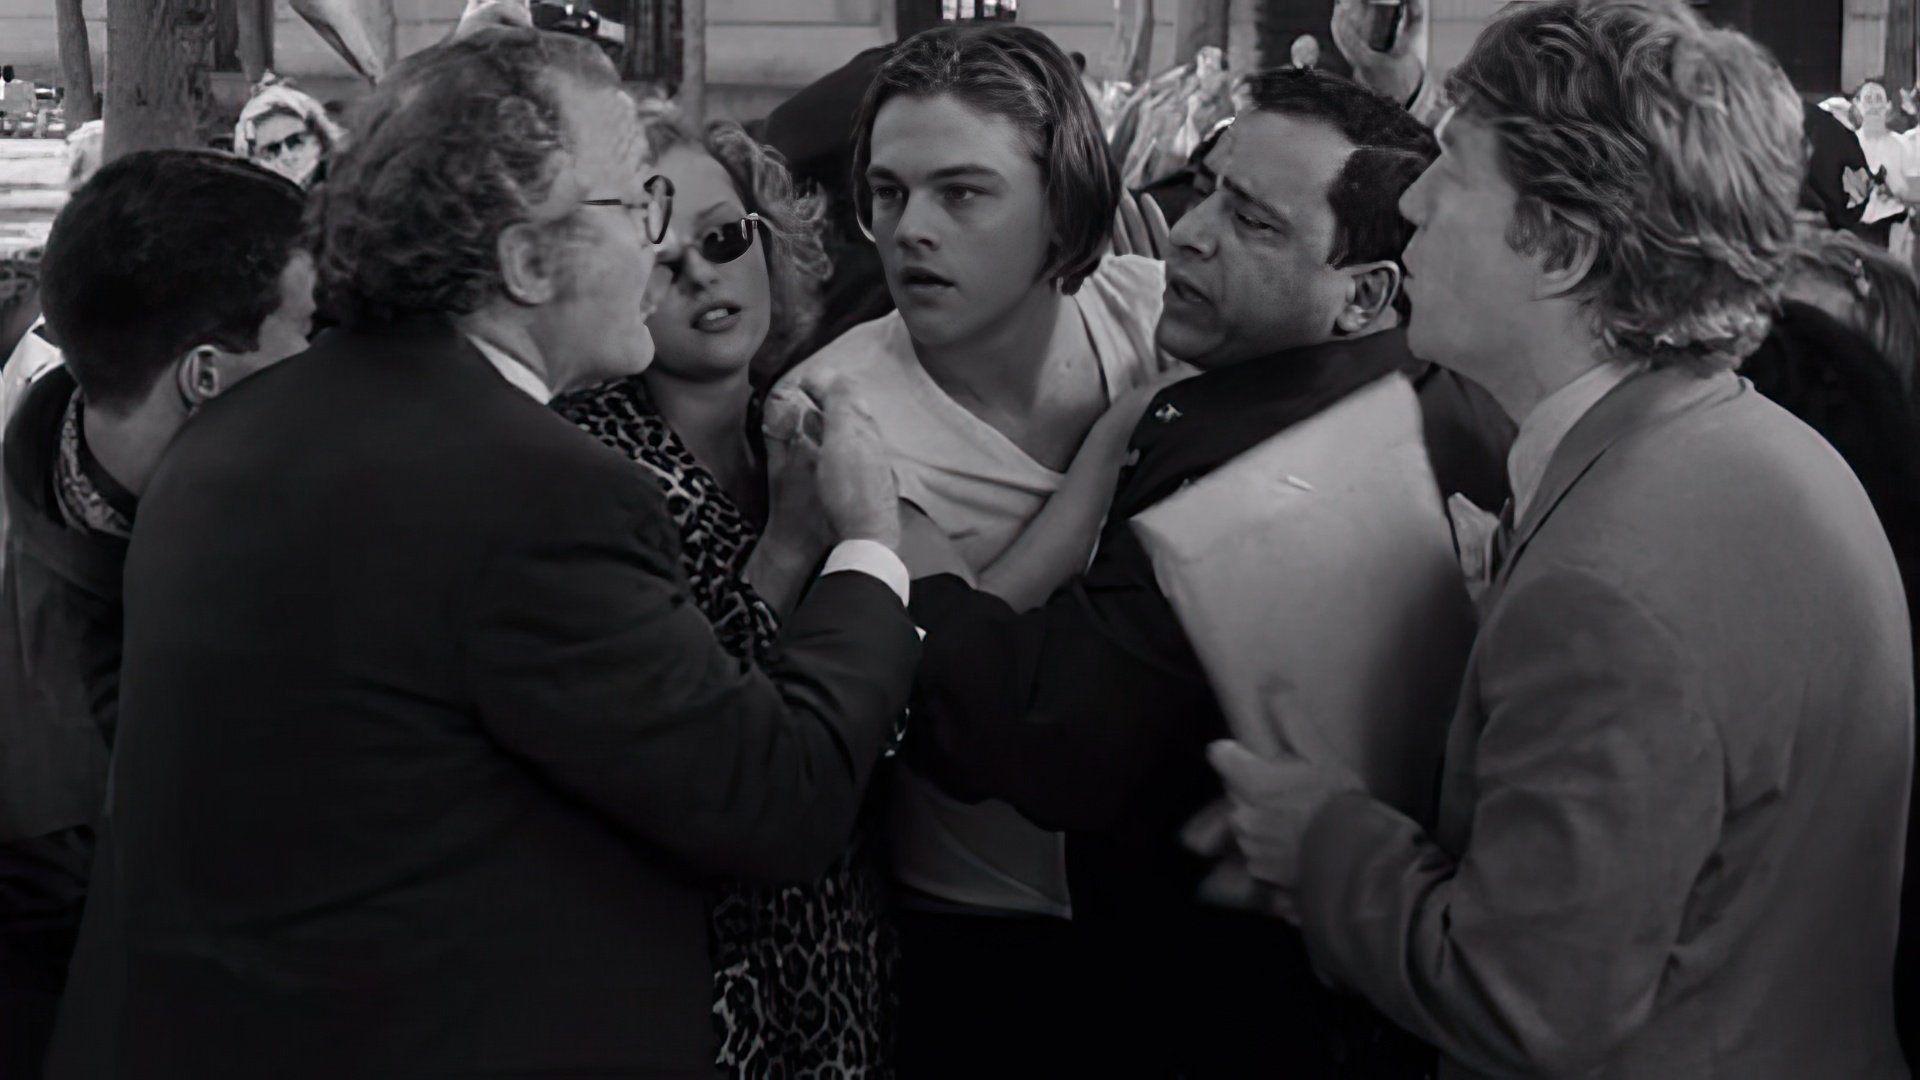 A Frame from the Film Celebrity